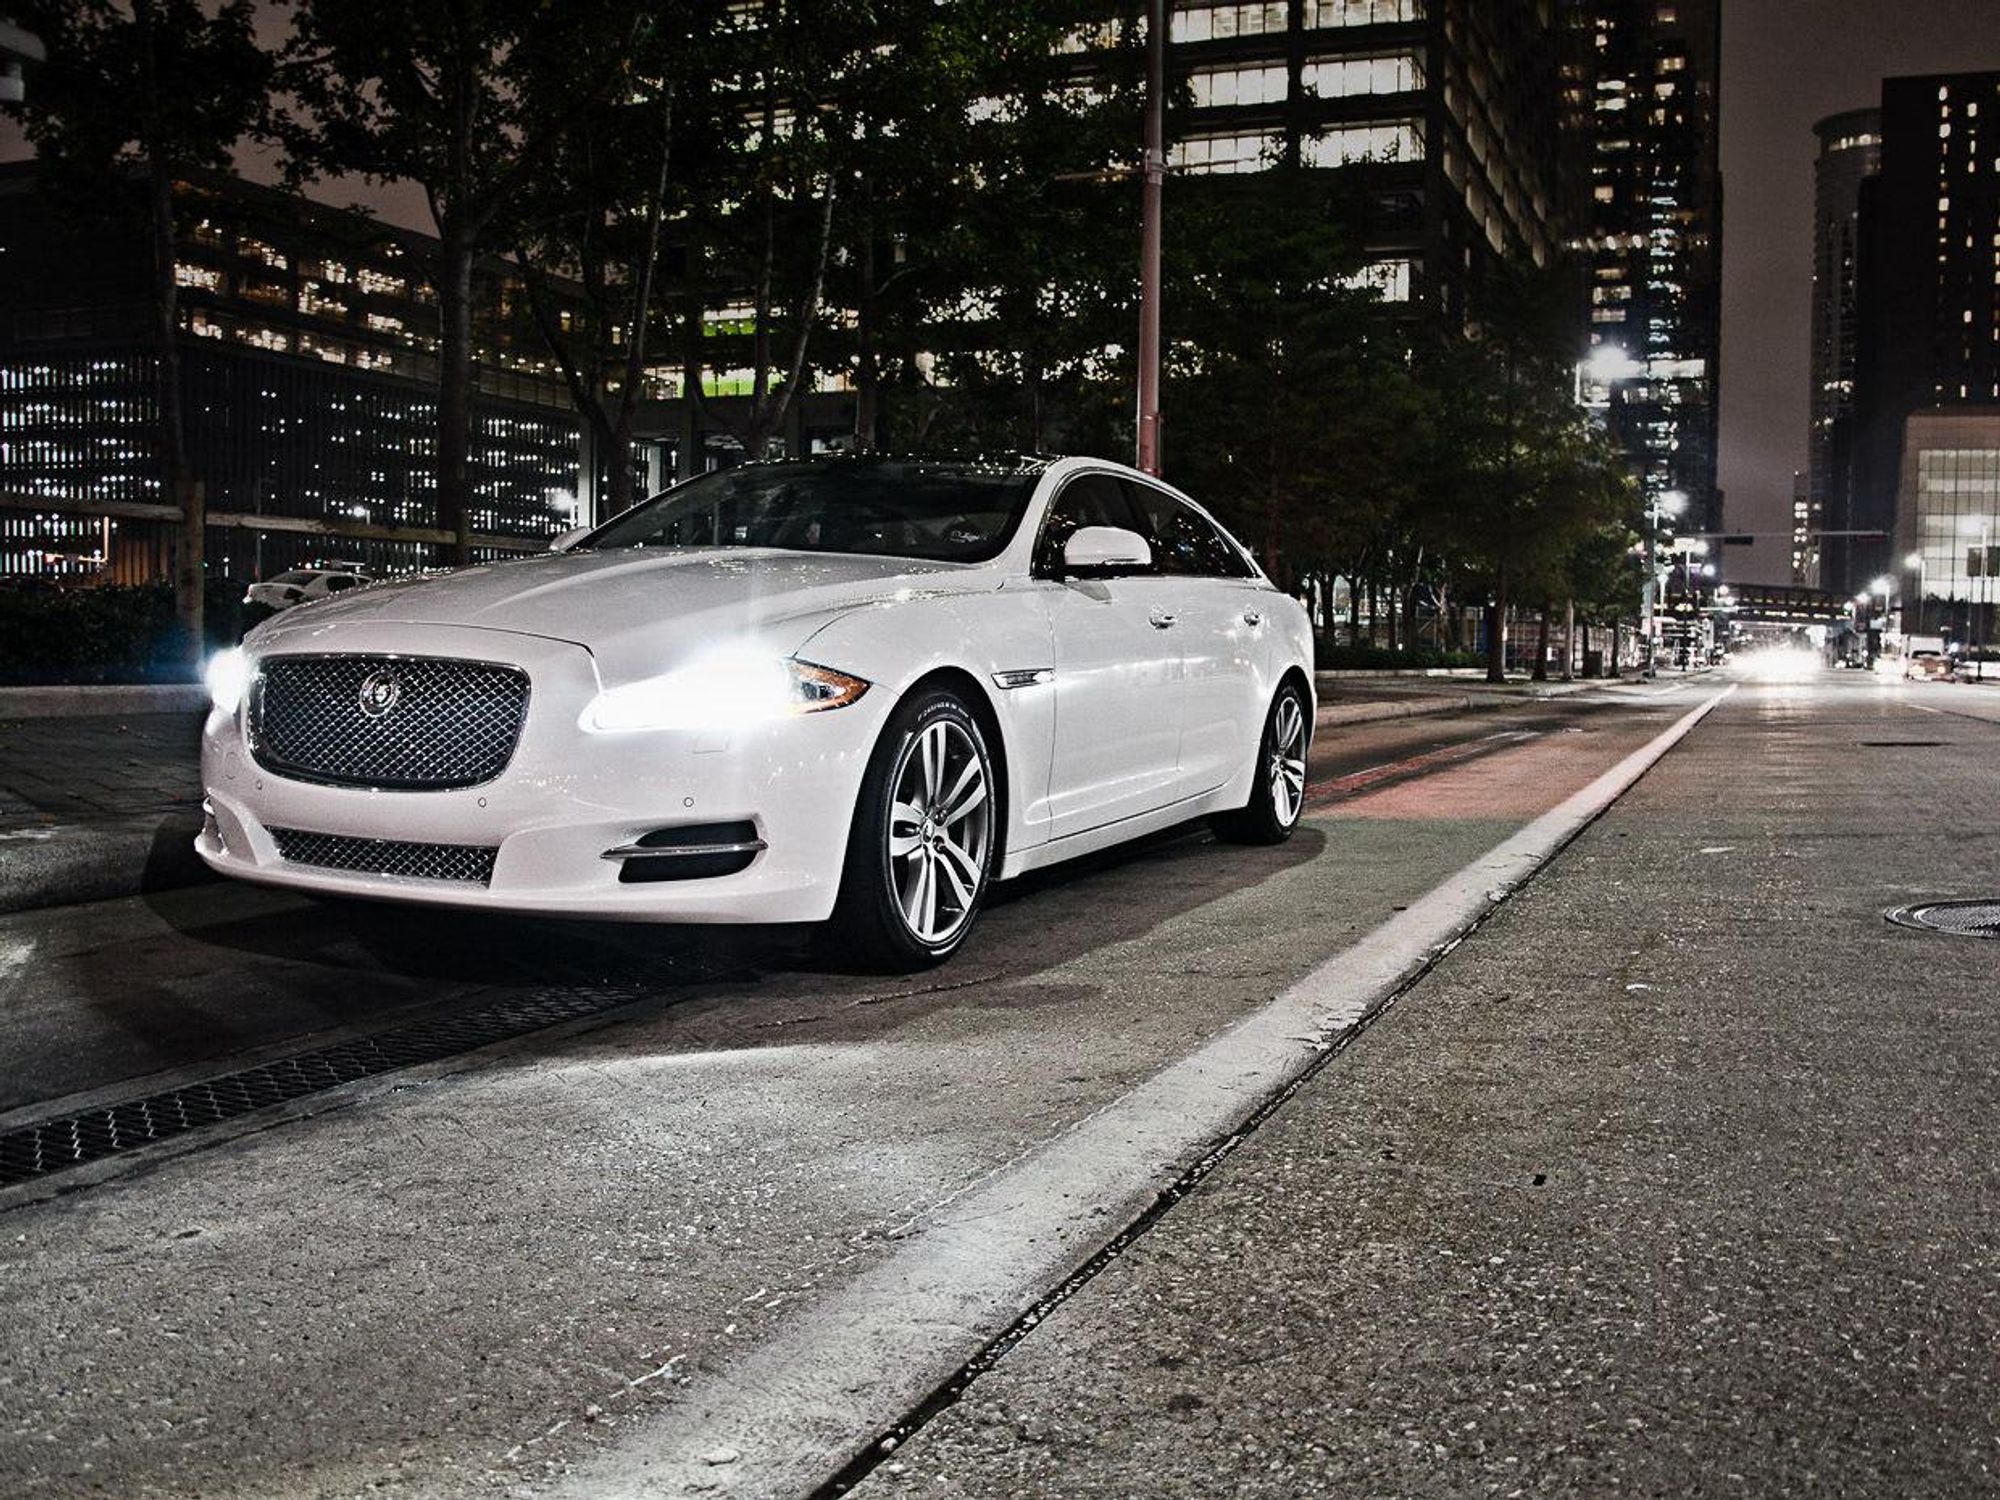 Putting the Jaguar XJ to the ultimate test: Houston's roads & sexy Trios